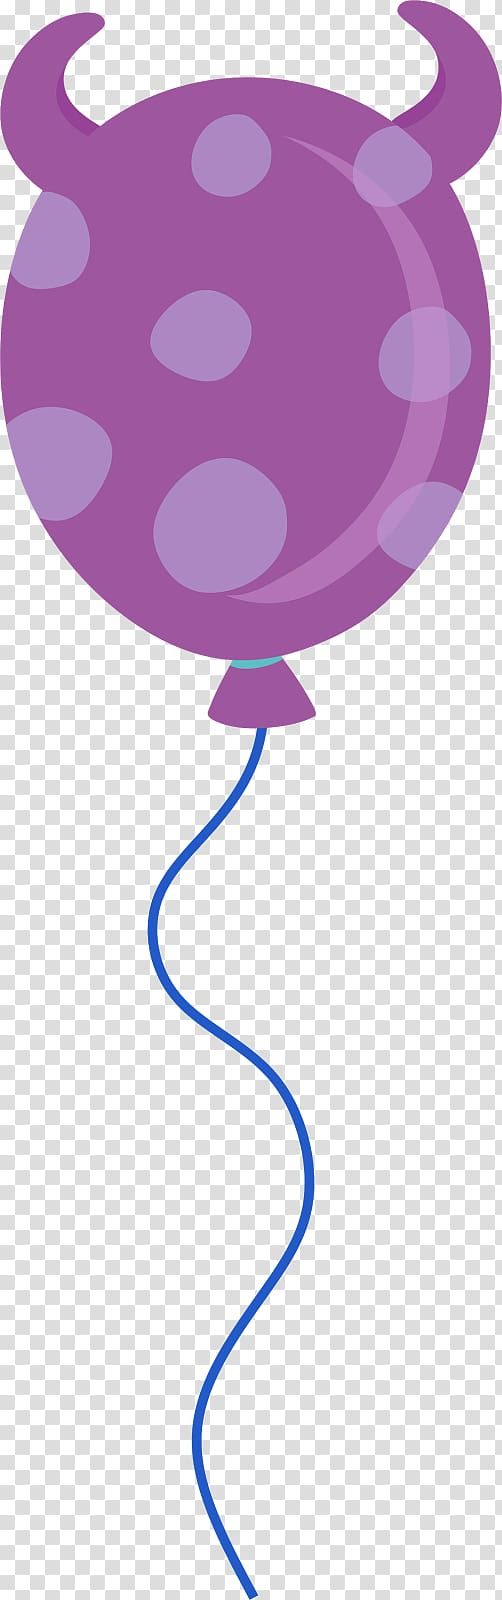 wazowski,monsters,inc,purple,violet,flower,magenta,monsters university,petal,pink,toy balloon,monsters inc,monster,mike wazowski,line art,line,drawing,birthday,walt disney company,mike,balloon,boo,monsters, inc.,png clipart,free png,transparent background,free clipart,clip art,free download,png,comhiclipart